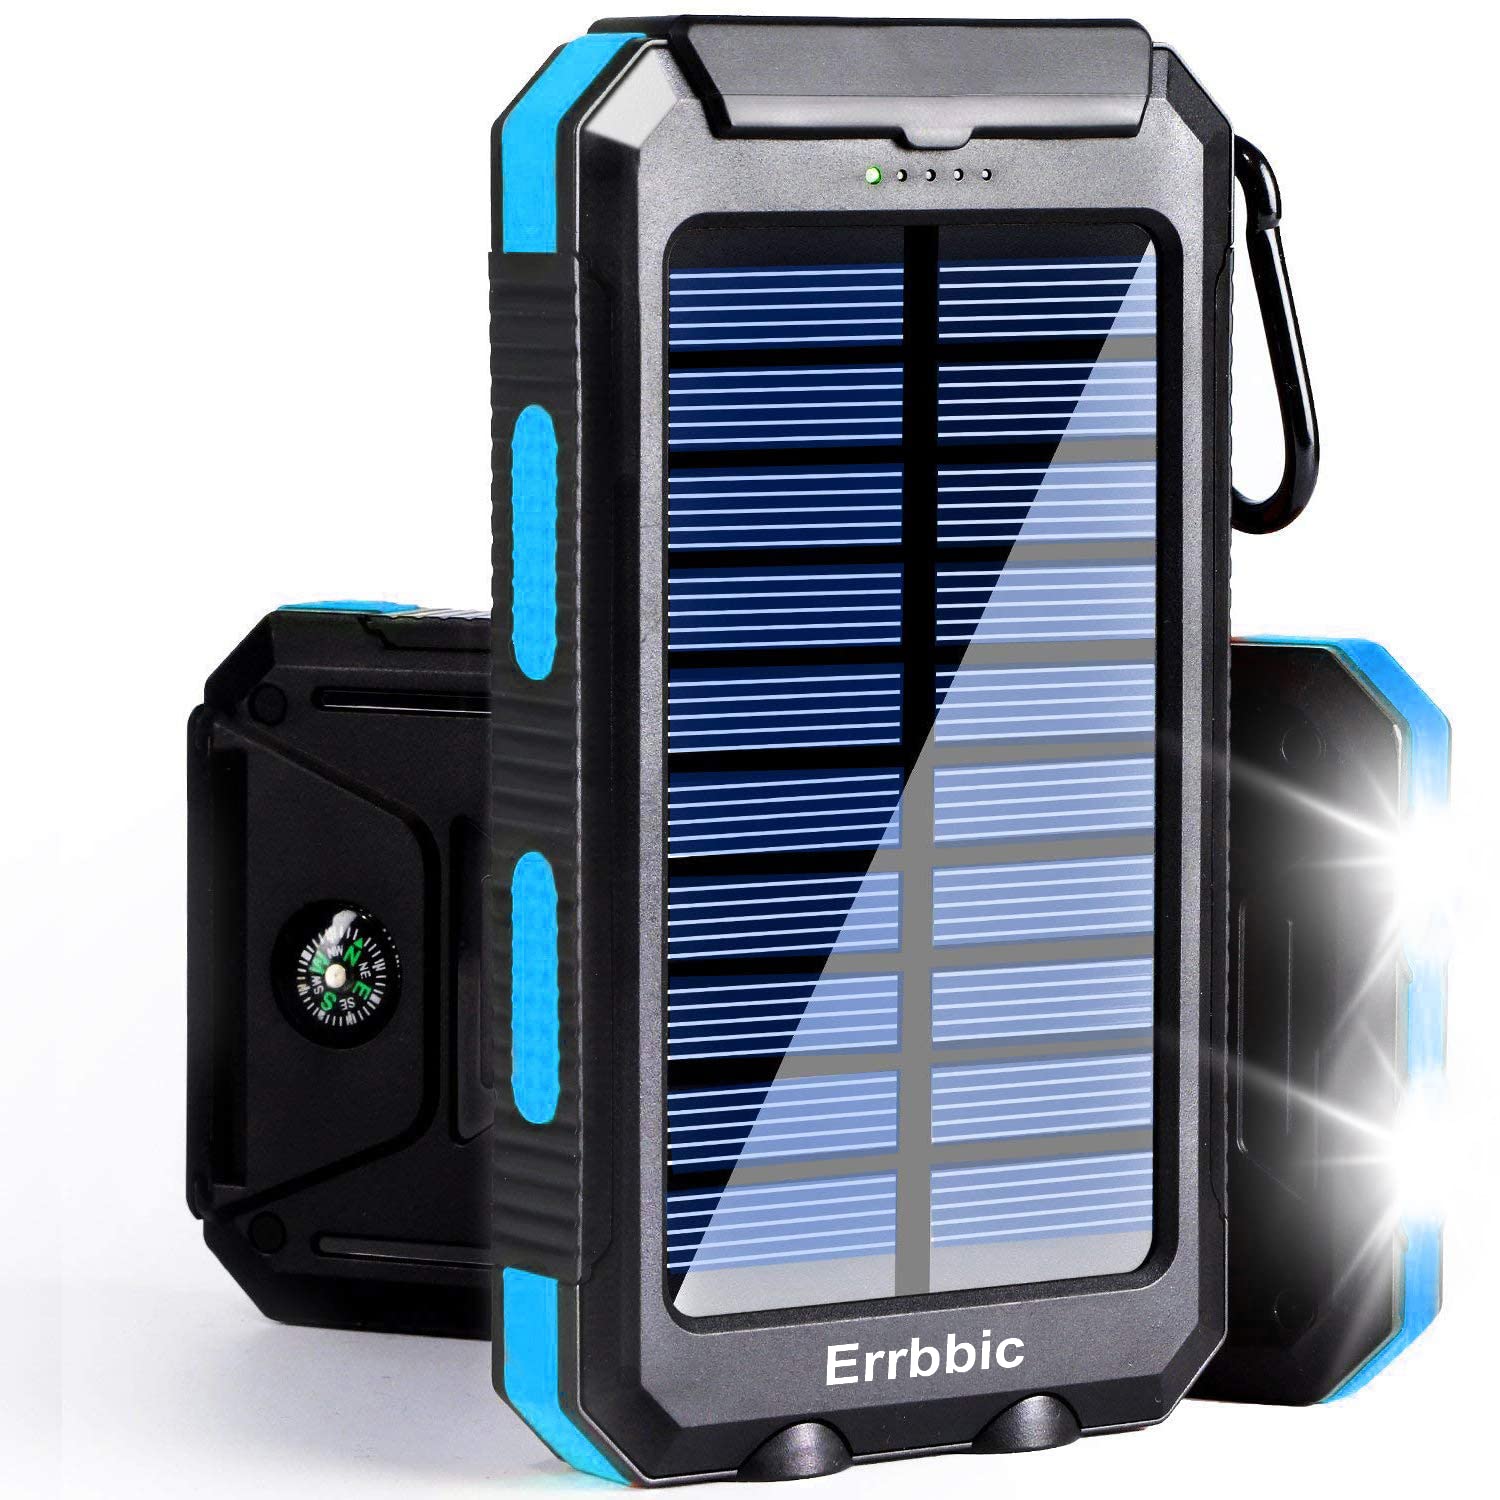 Mua Solar Power Bank Portable Charger 20000mah Waterproof Battery Backup Charger  Solar Phone Charger with Dual LED Flashlights and Compass for All  CellPhones, Tablets, and Electronic Devices trên Amazon Mỹ chính hãng